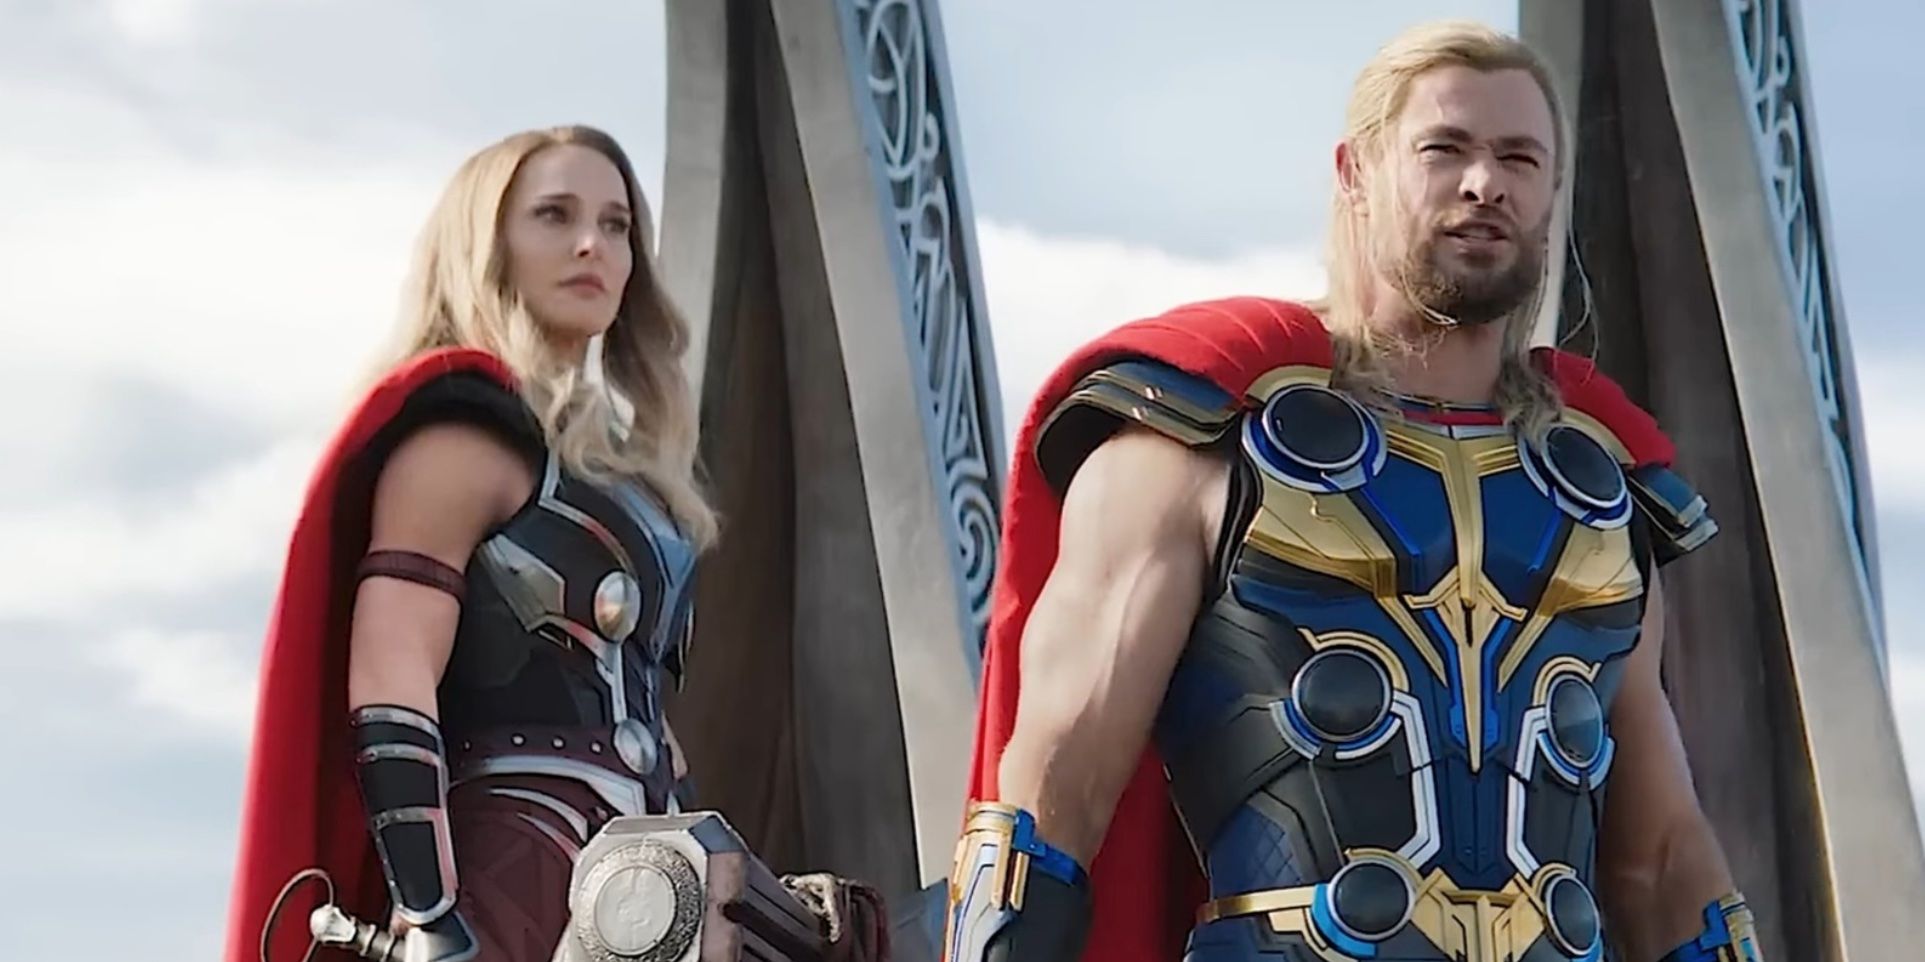 Chris Hemsworth and Natalie Portman in 'Thor: Love and Thunder'